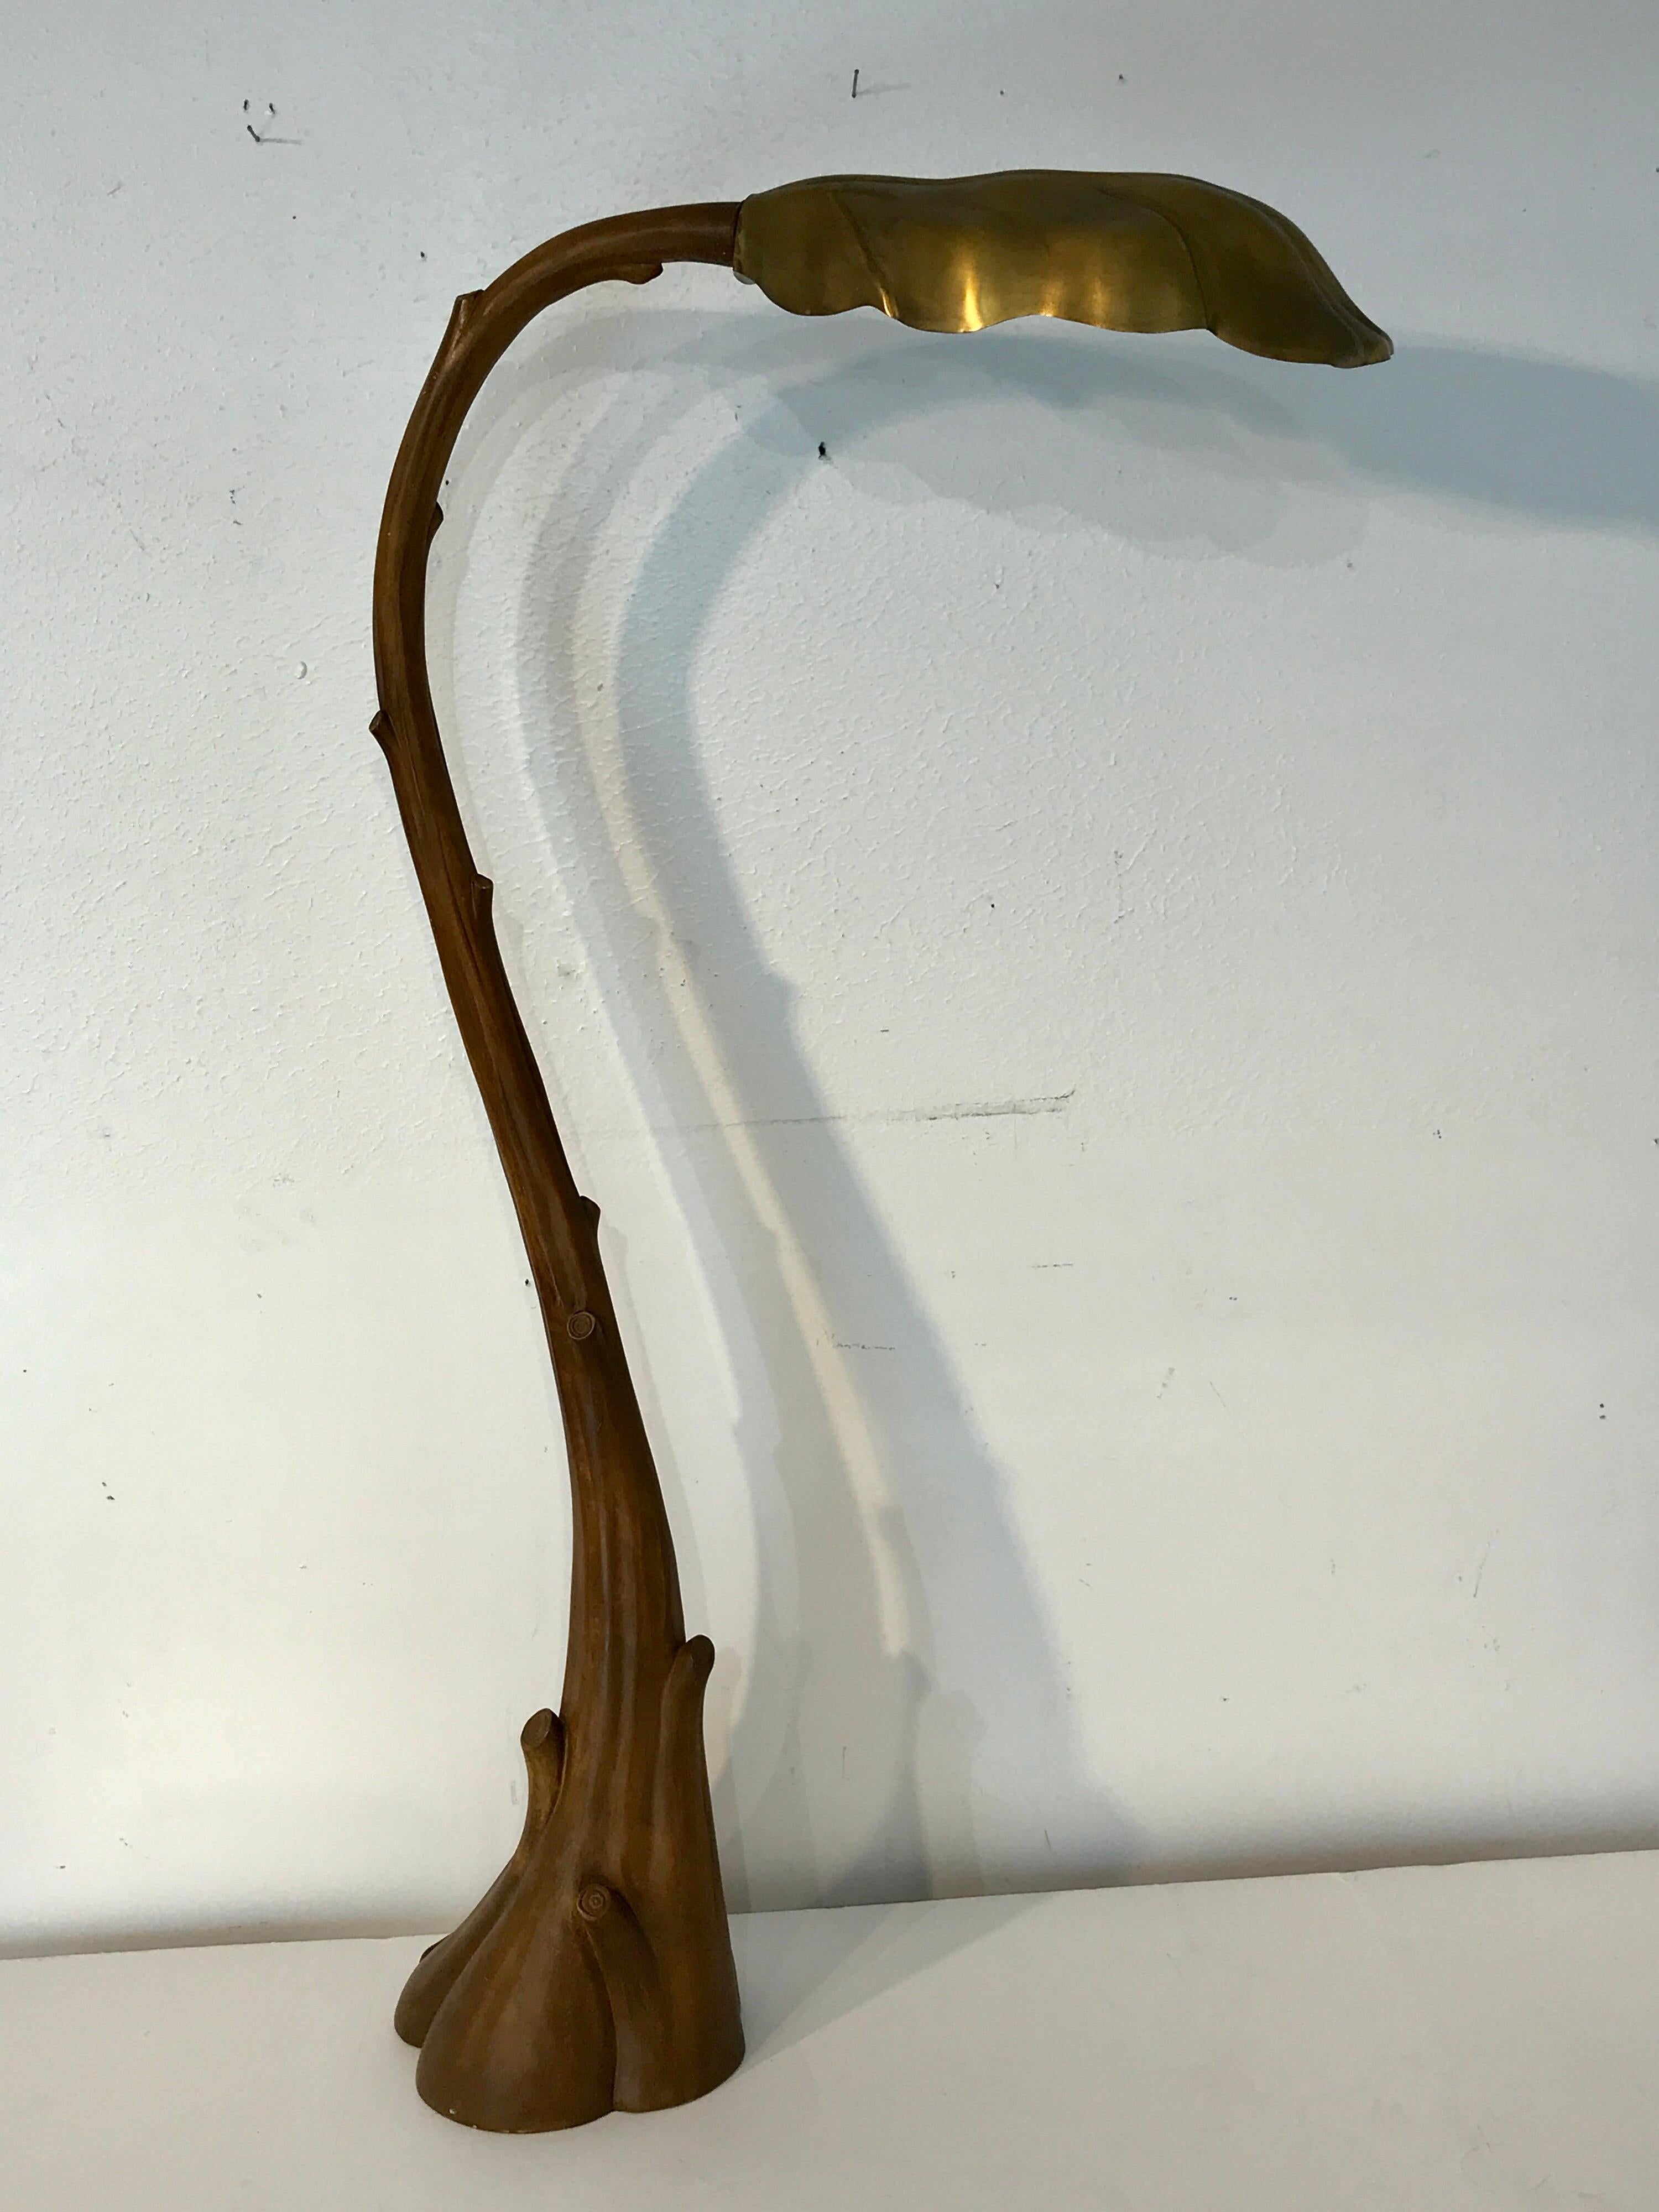 Faux Bois floor lamp, by Chapman, with adjustable patinated 12